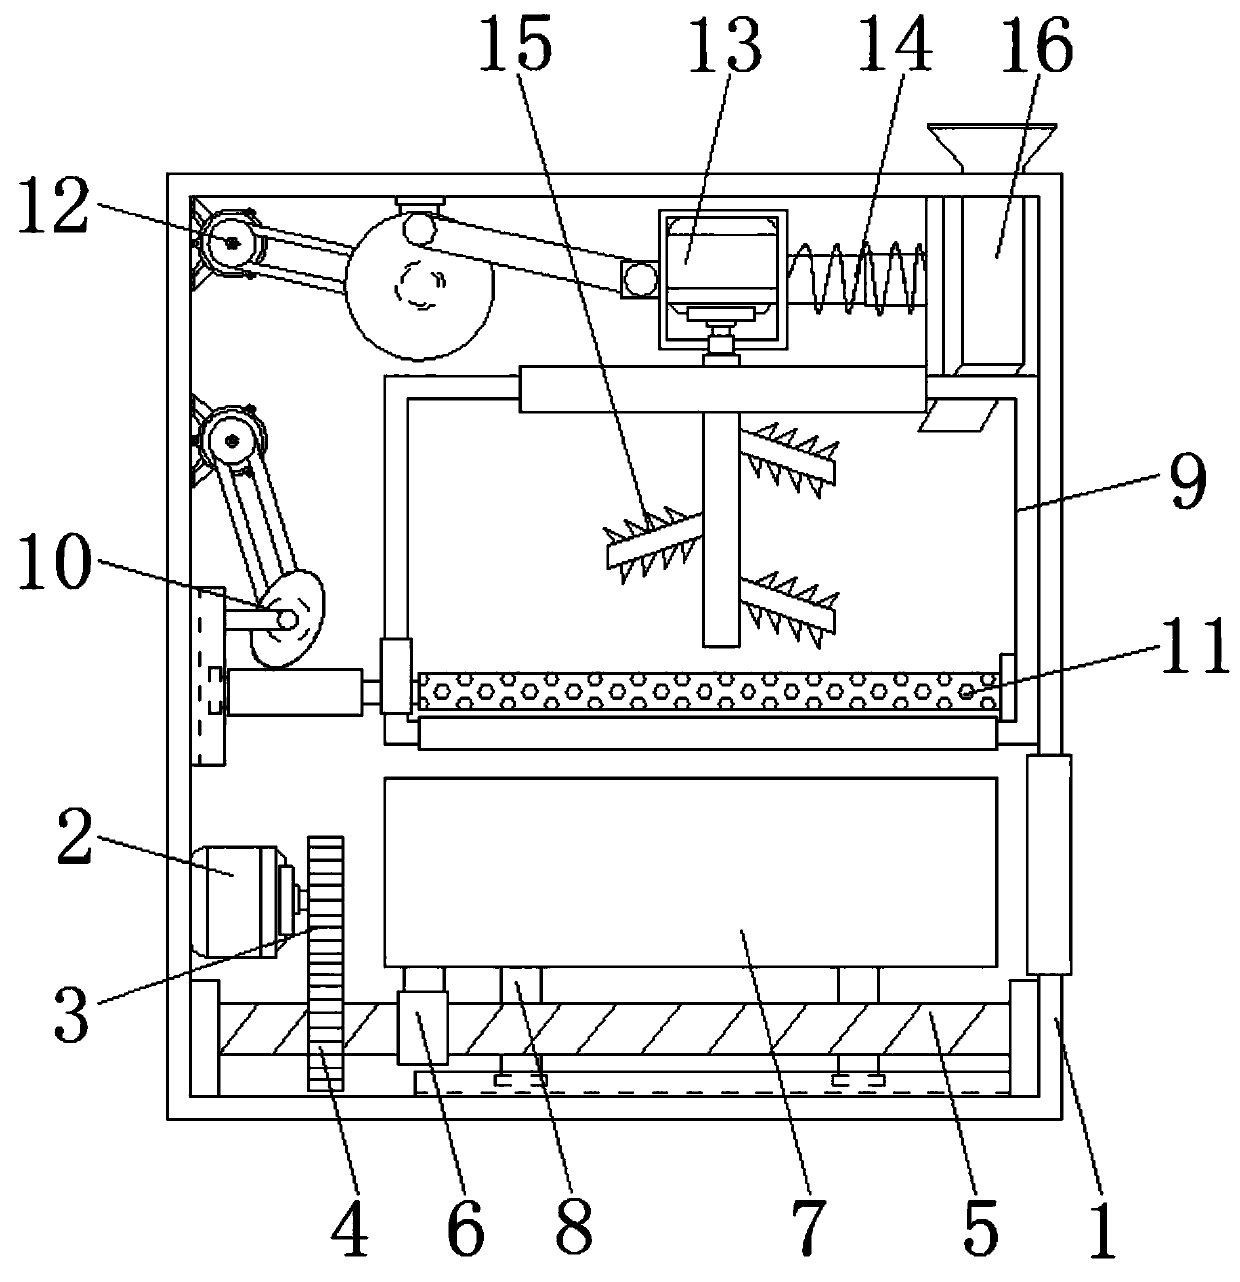 A convenient mushroom wood crushing and screening device for discharging